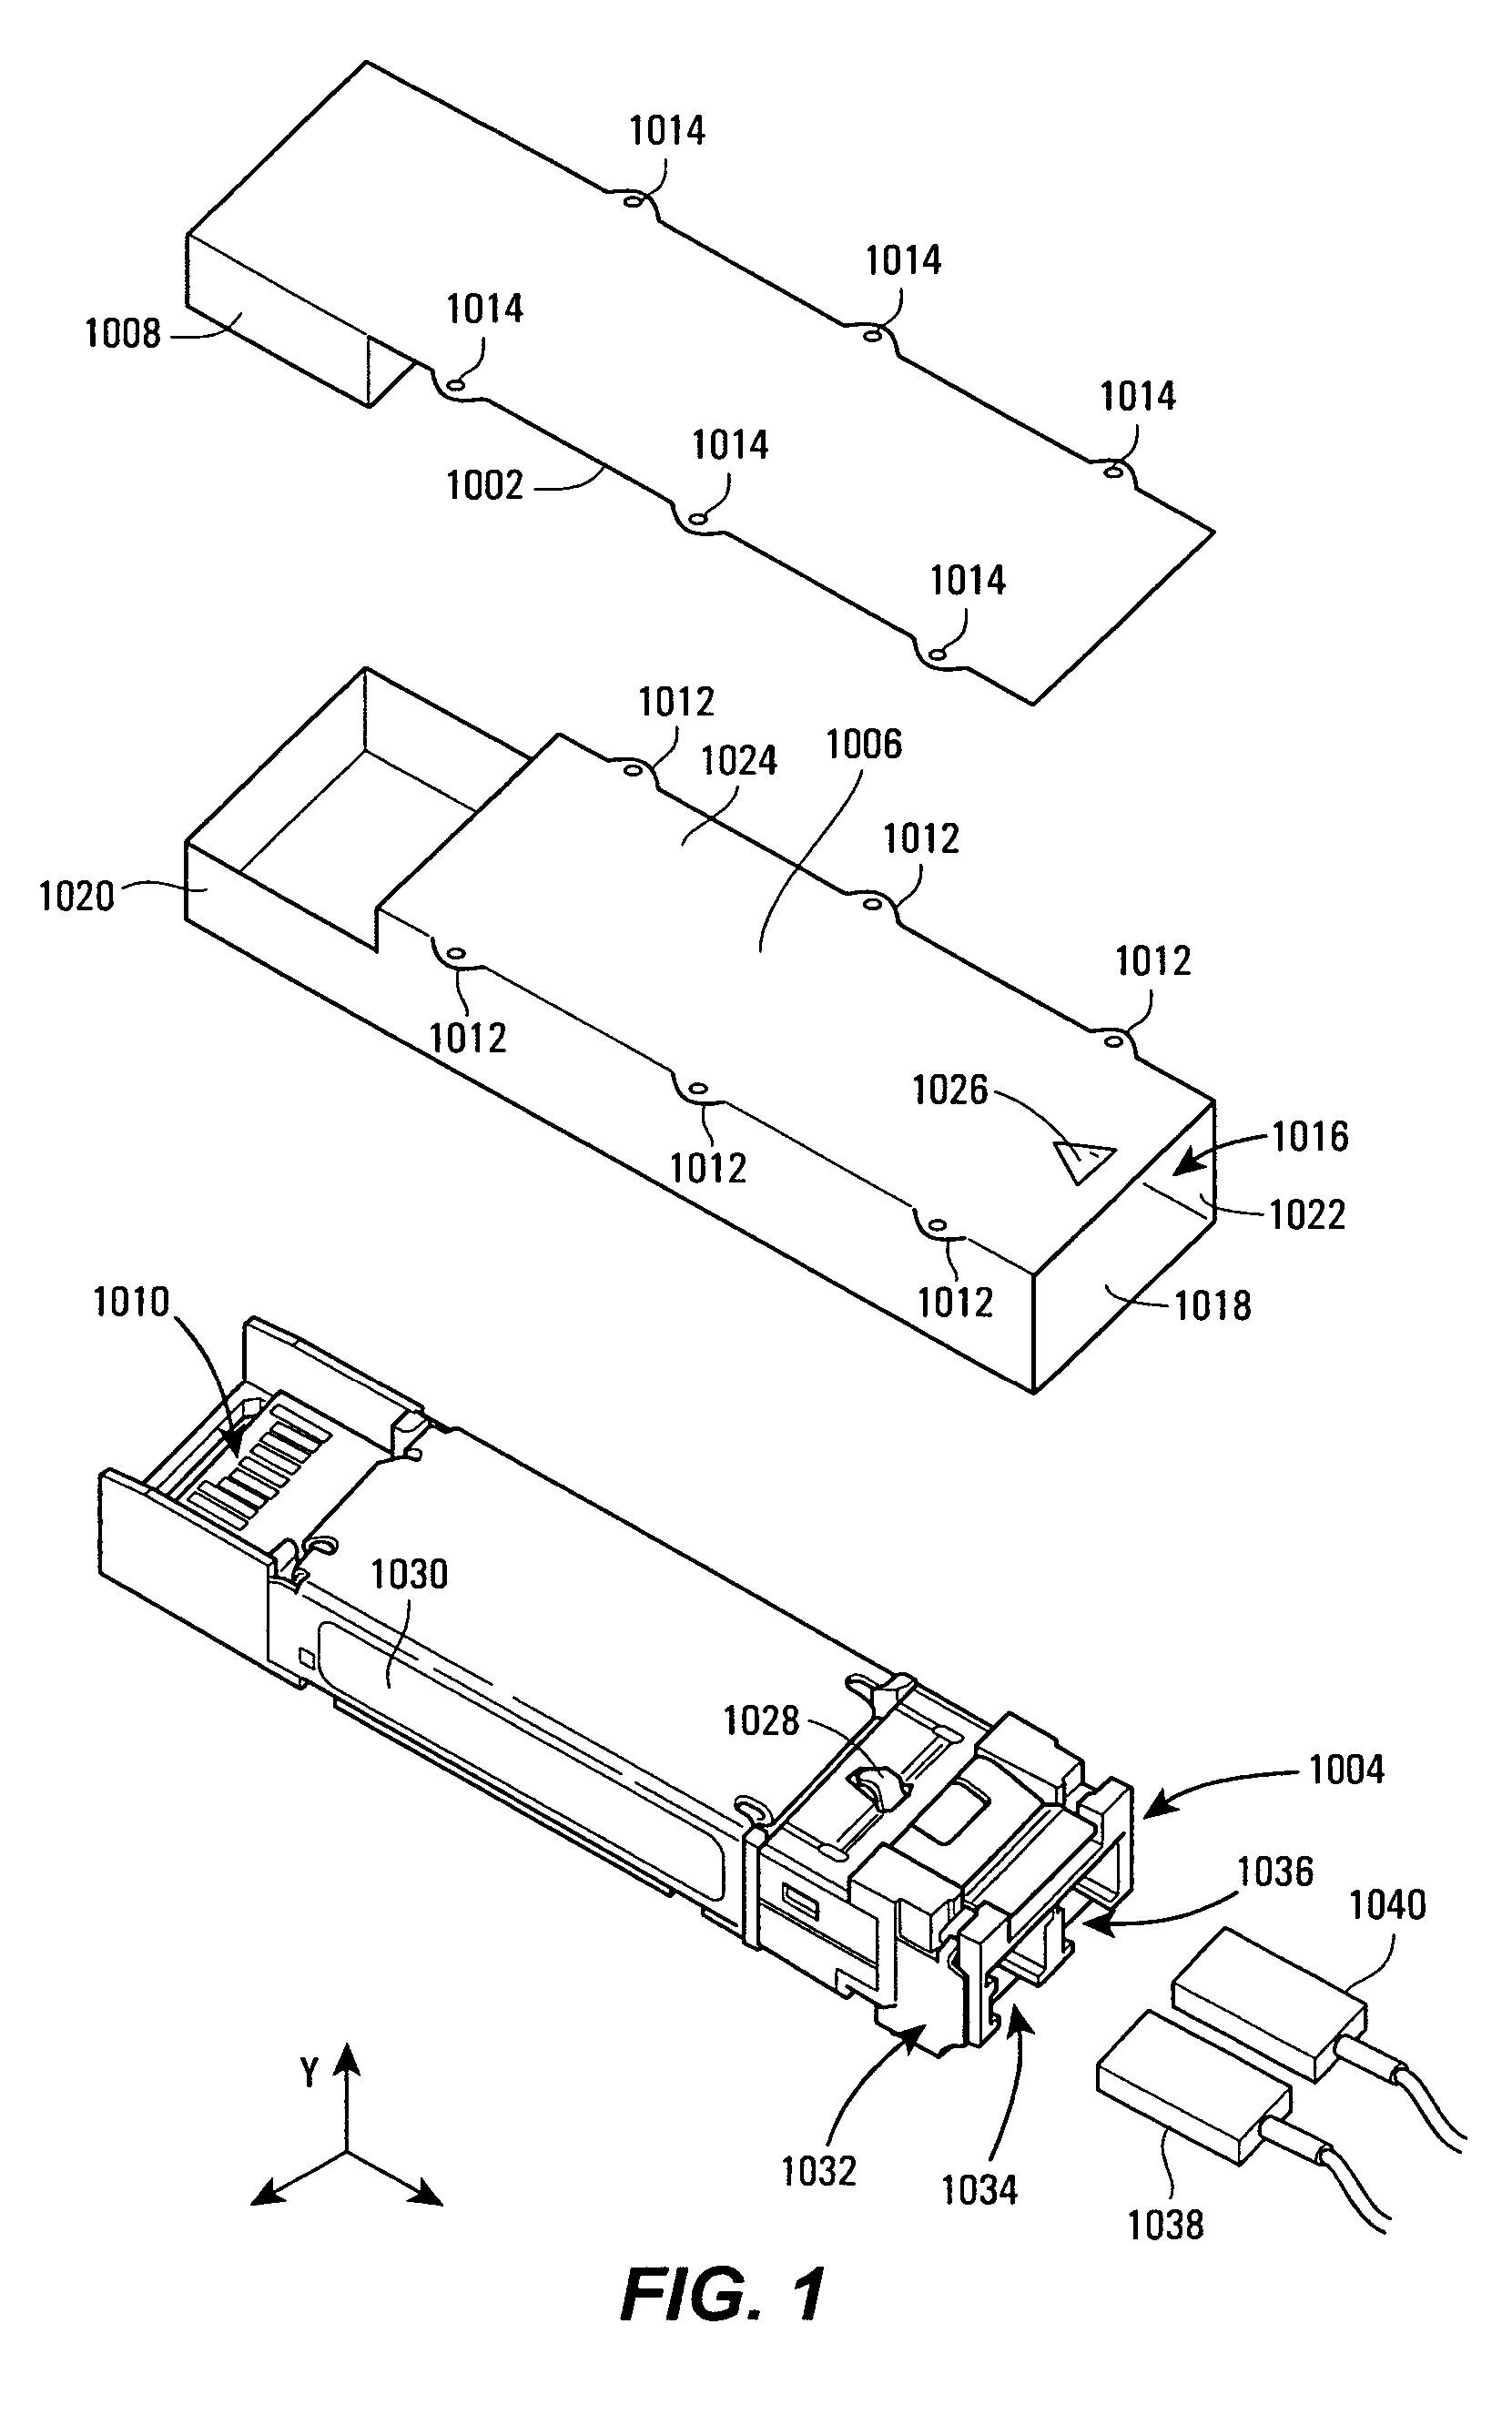 Optical module with latching/delatching mechanism